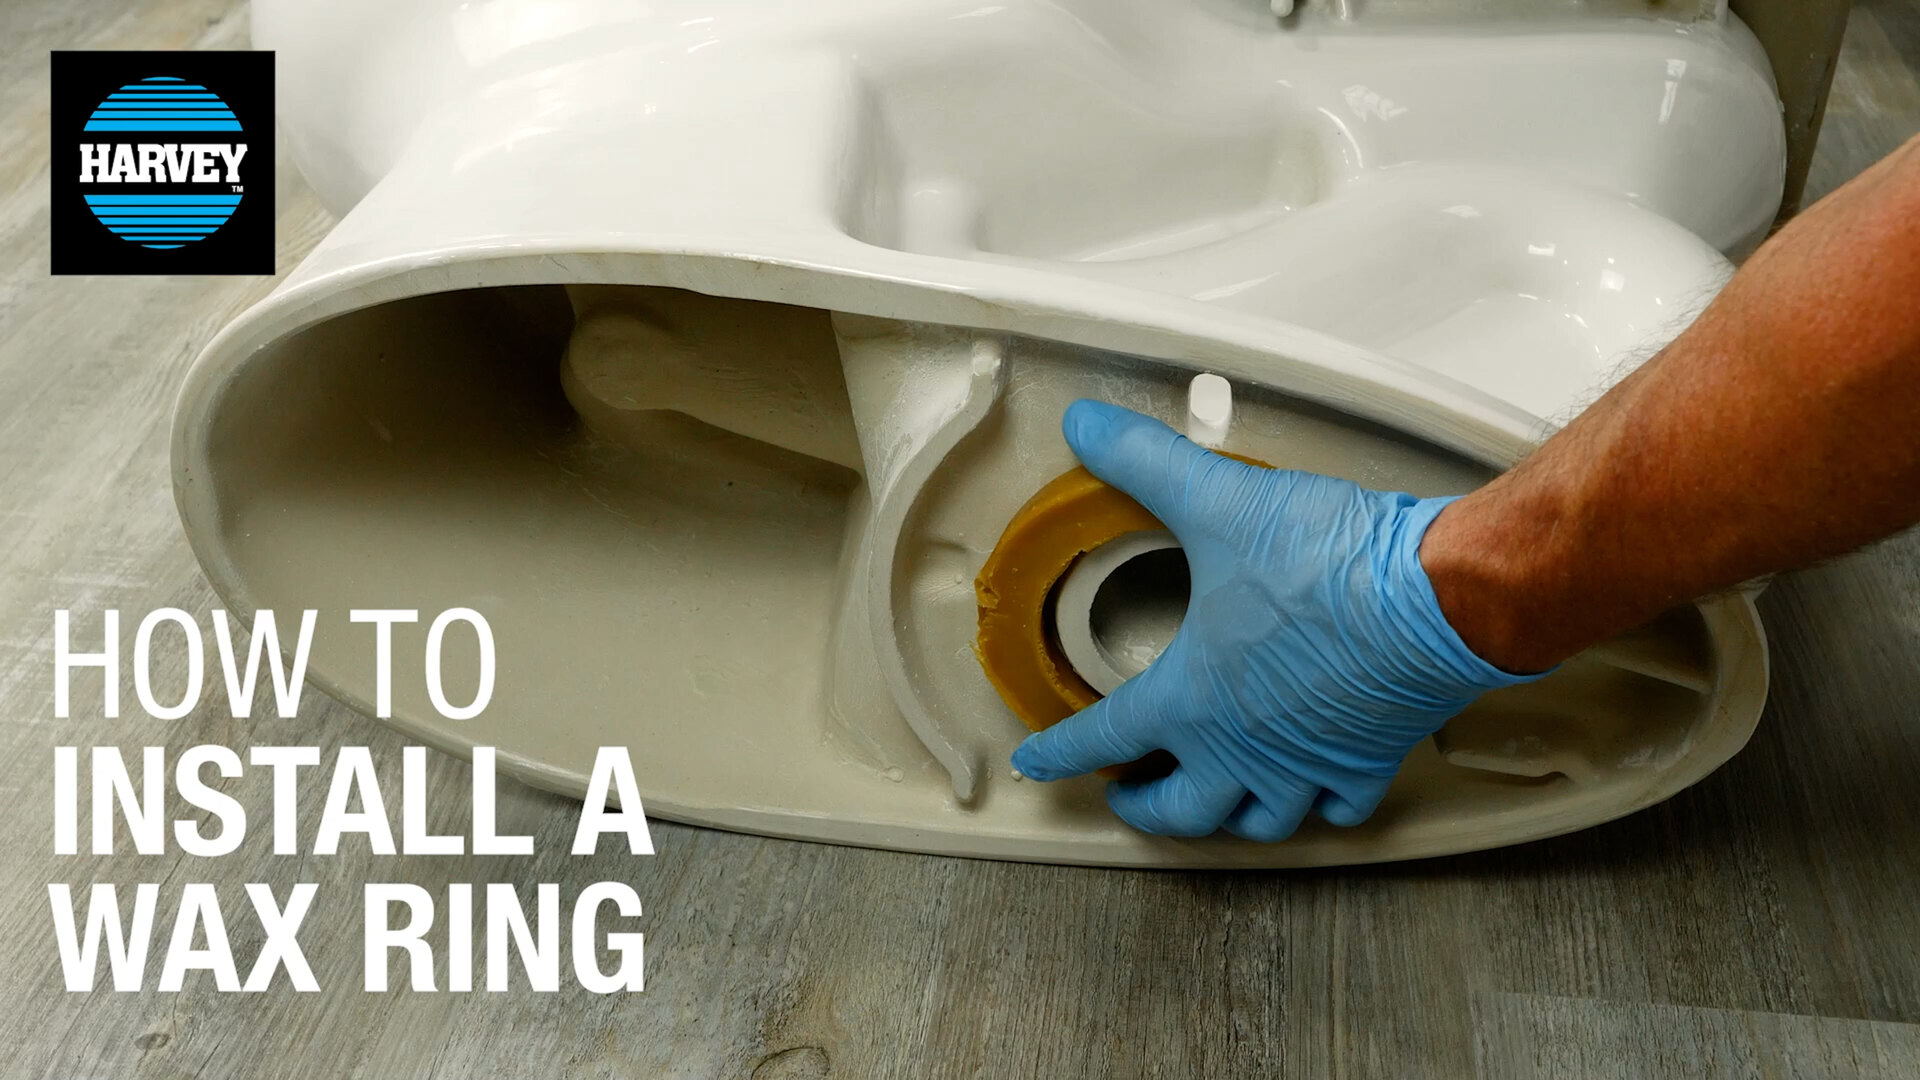 Harvey - How to Install a Wax Ring Video